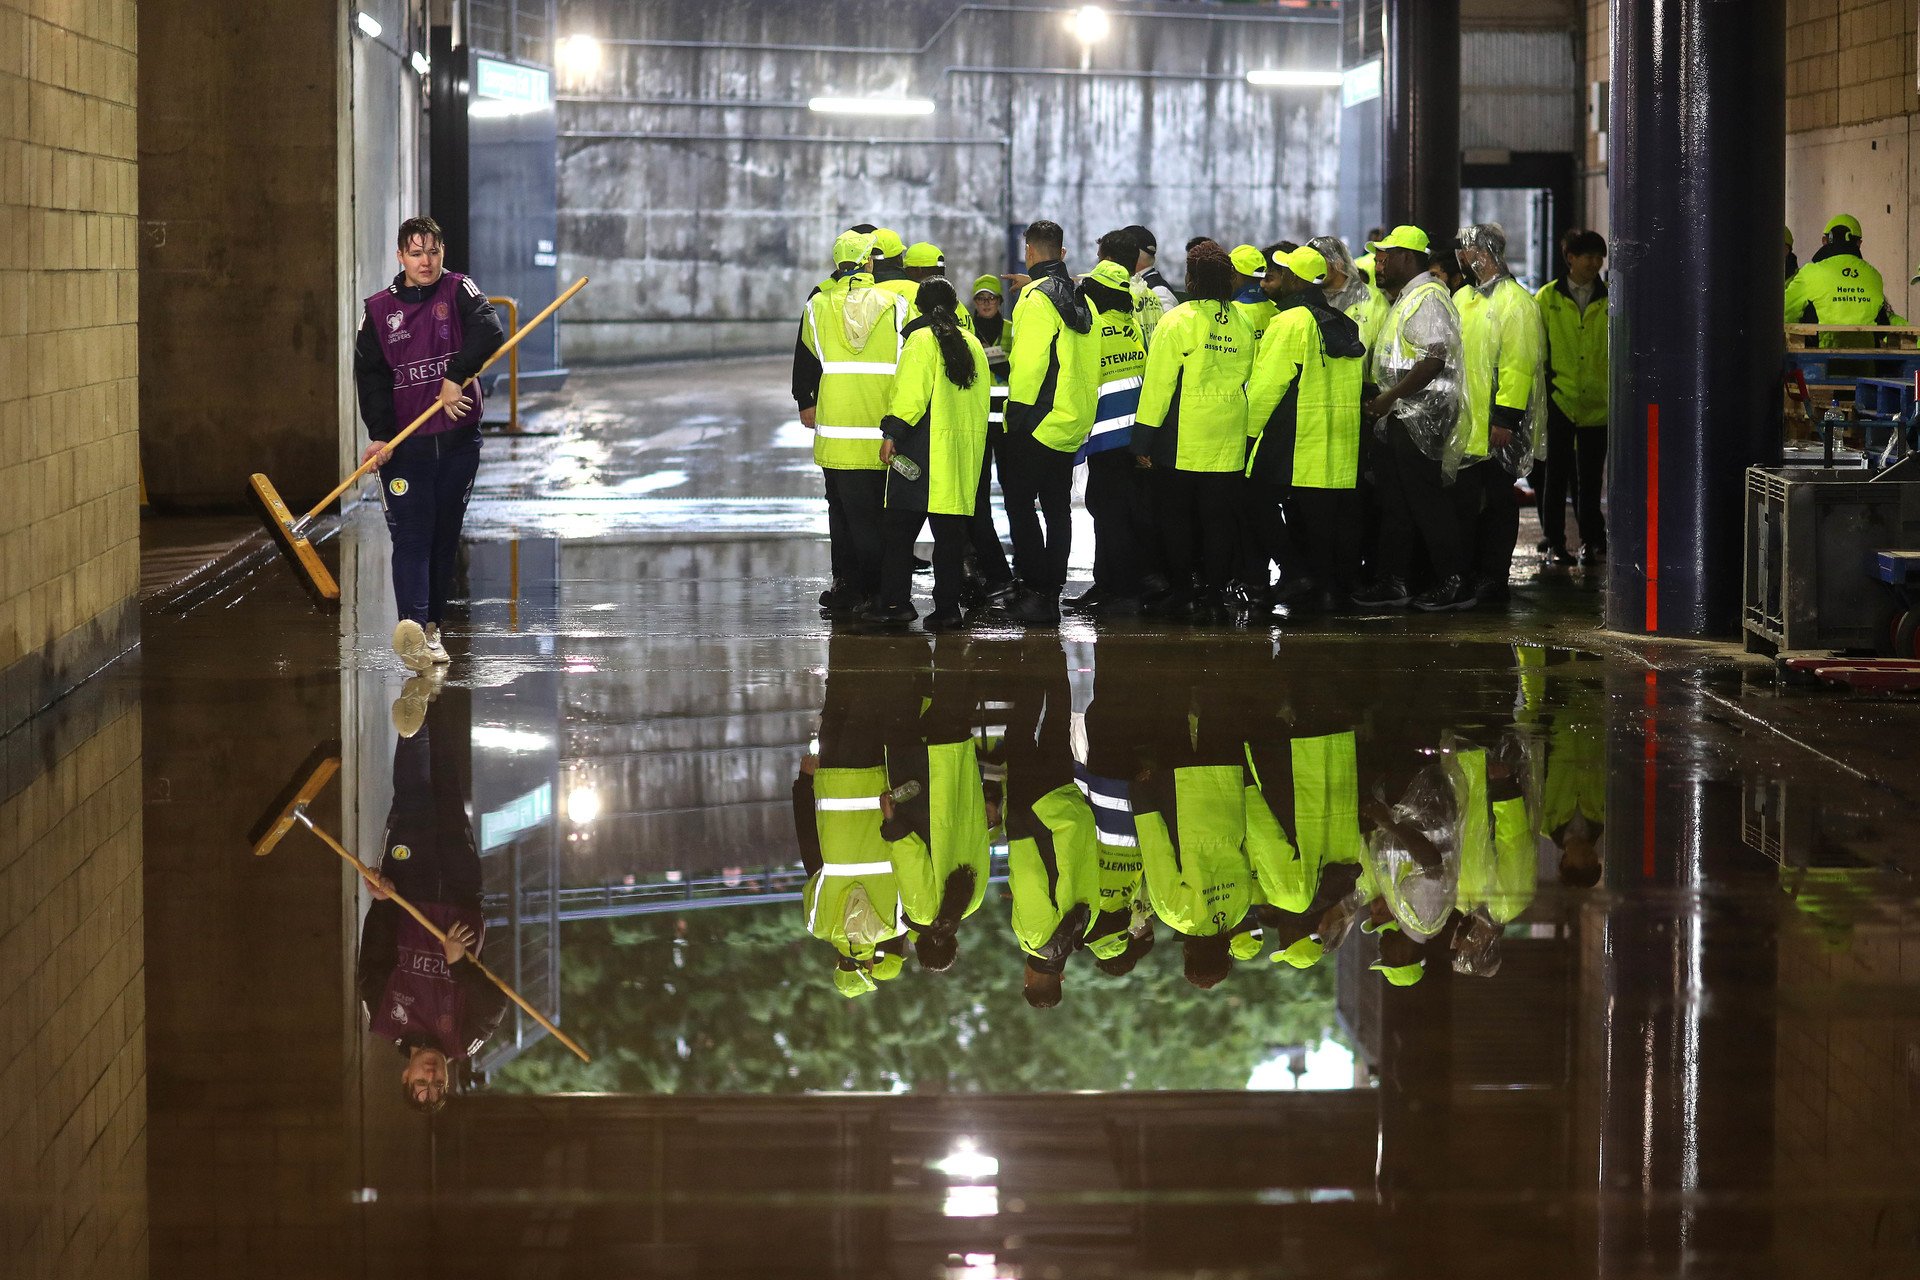 A soaking wet ballboy walks through a flooded concourse at Hampden Park as stewards stand by.